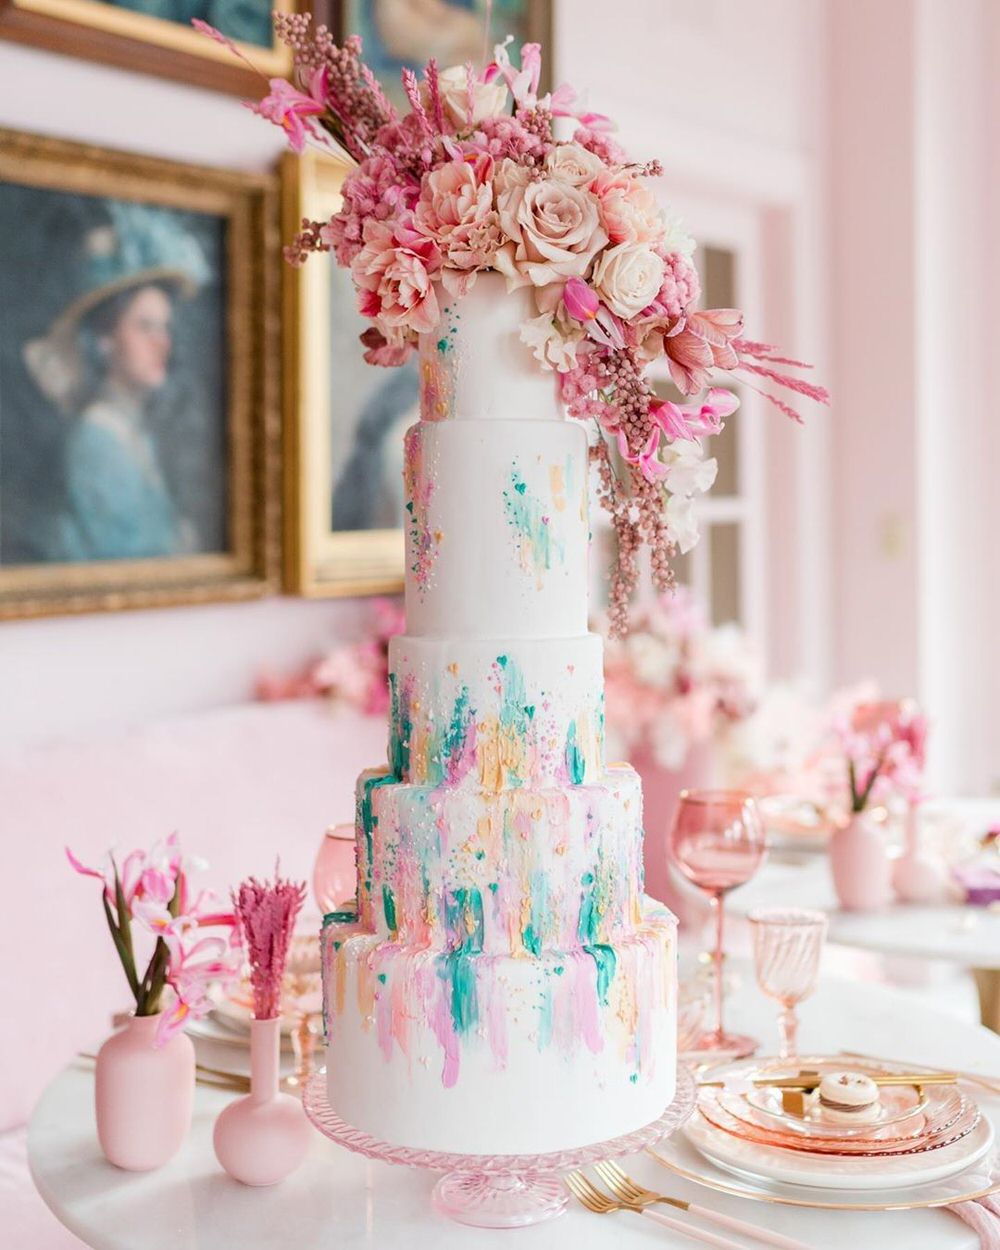 How To Design Incredible Wedding Cakes For 20 Guests